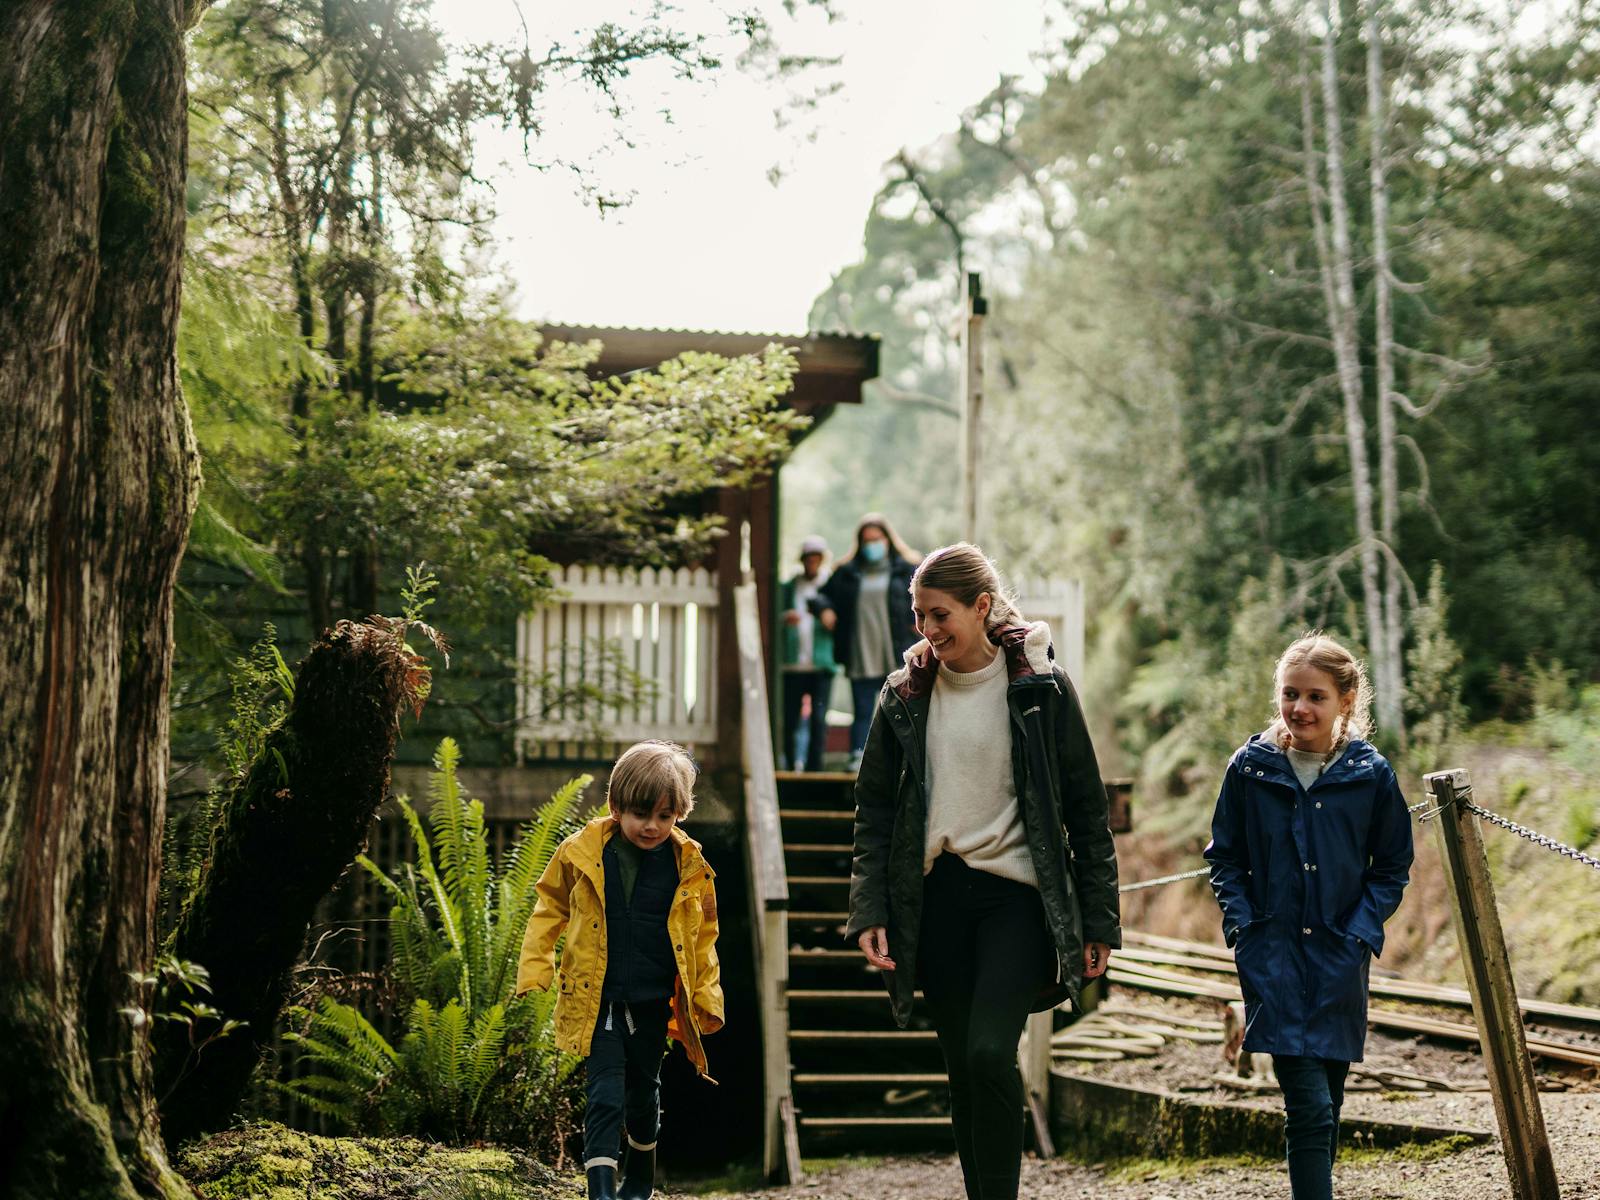 A mother and two young children walk away from a train platform built in the rainforest